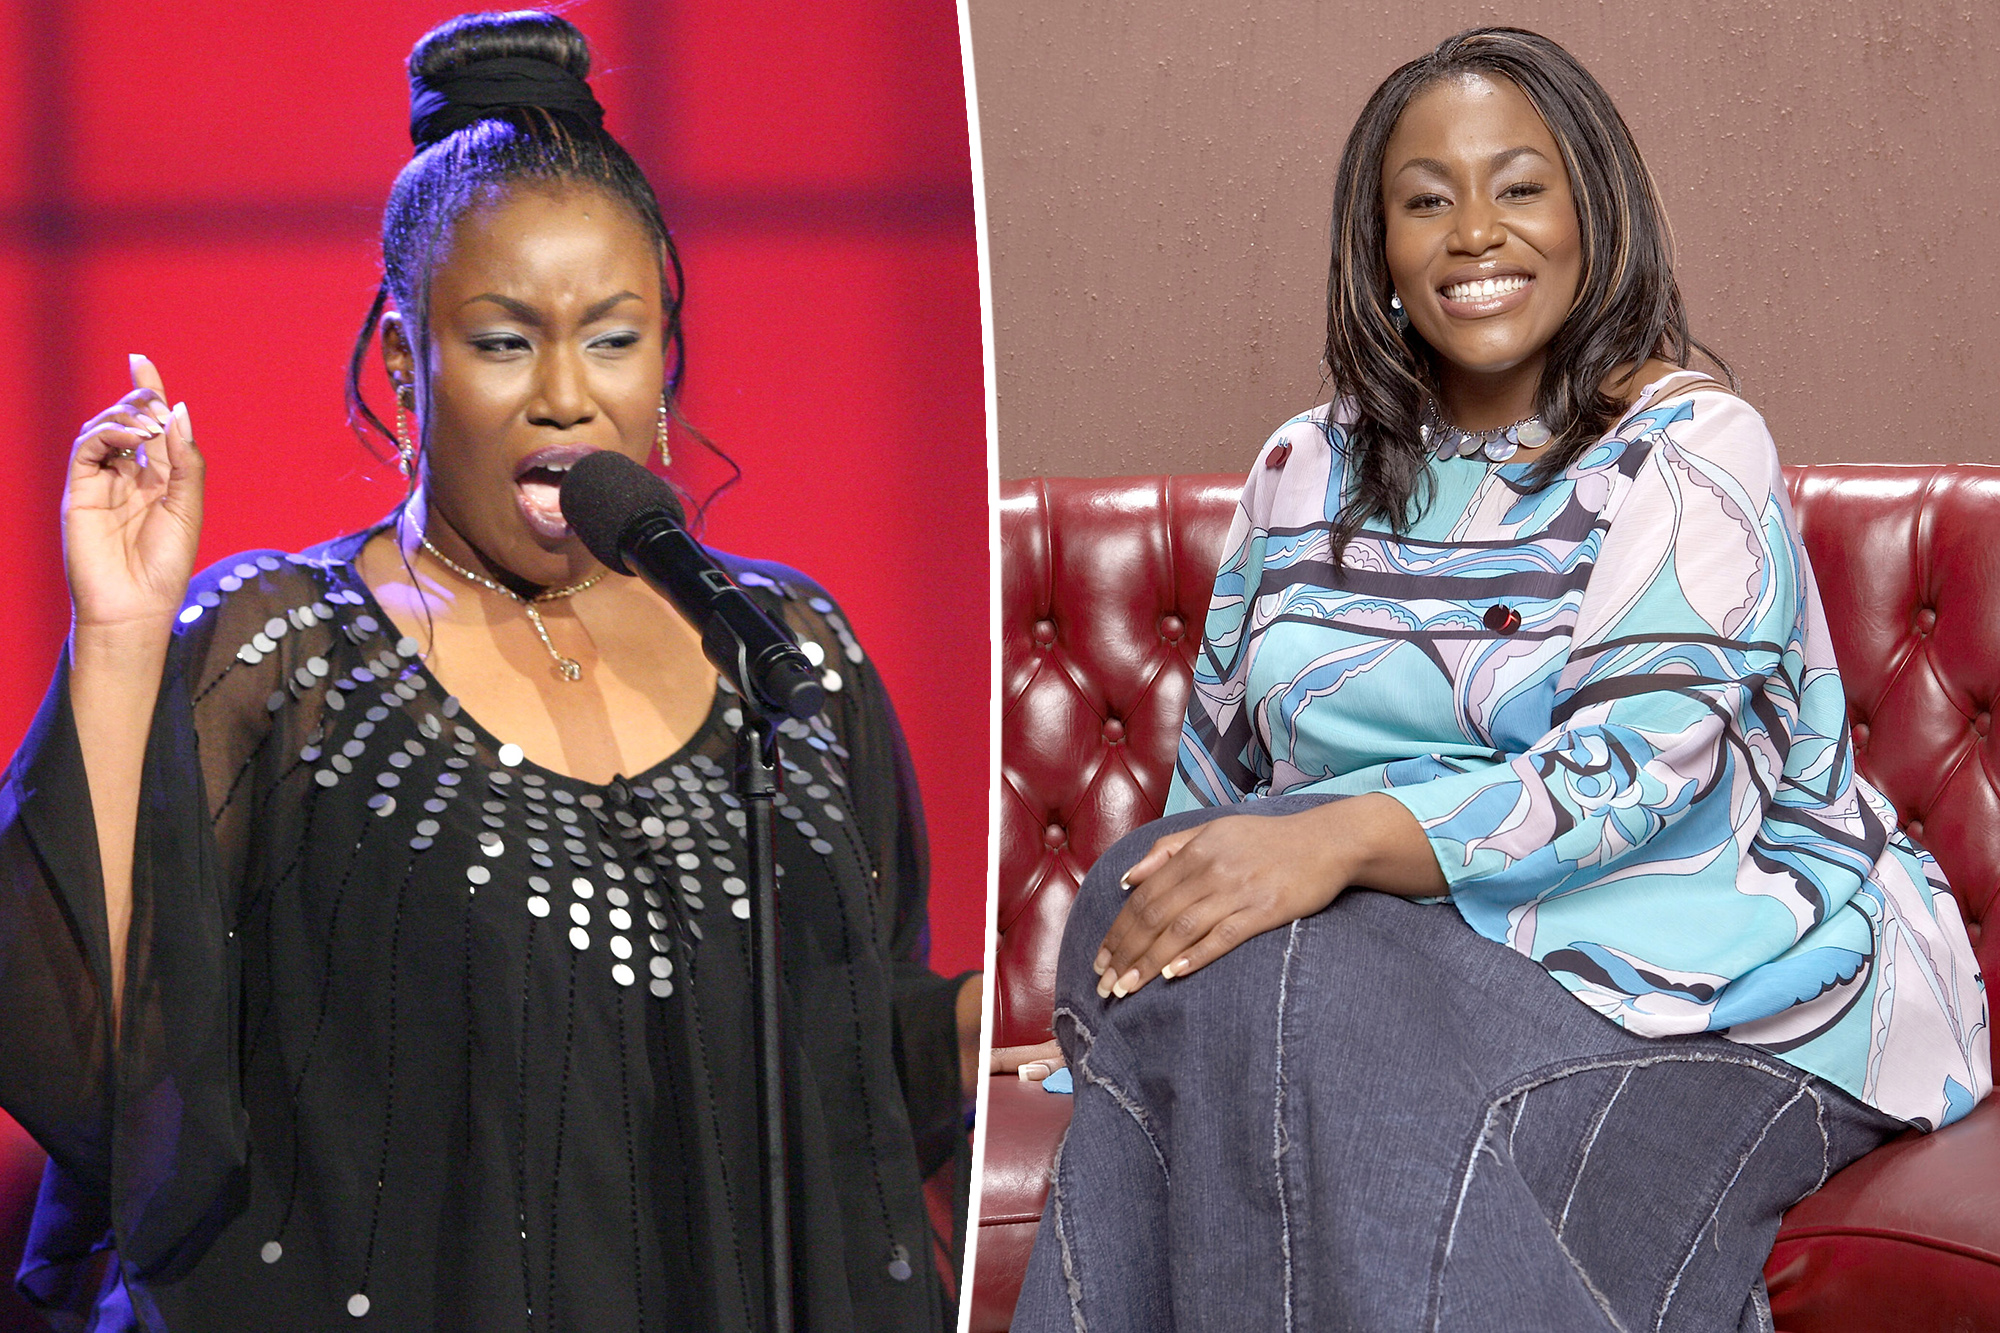 Remembering Mandisa: A Tribute to a Gospel Music Icon